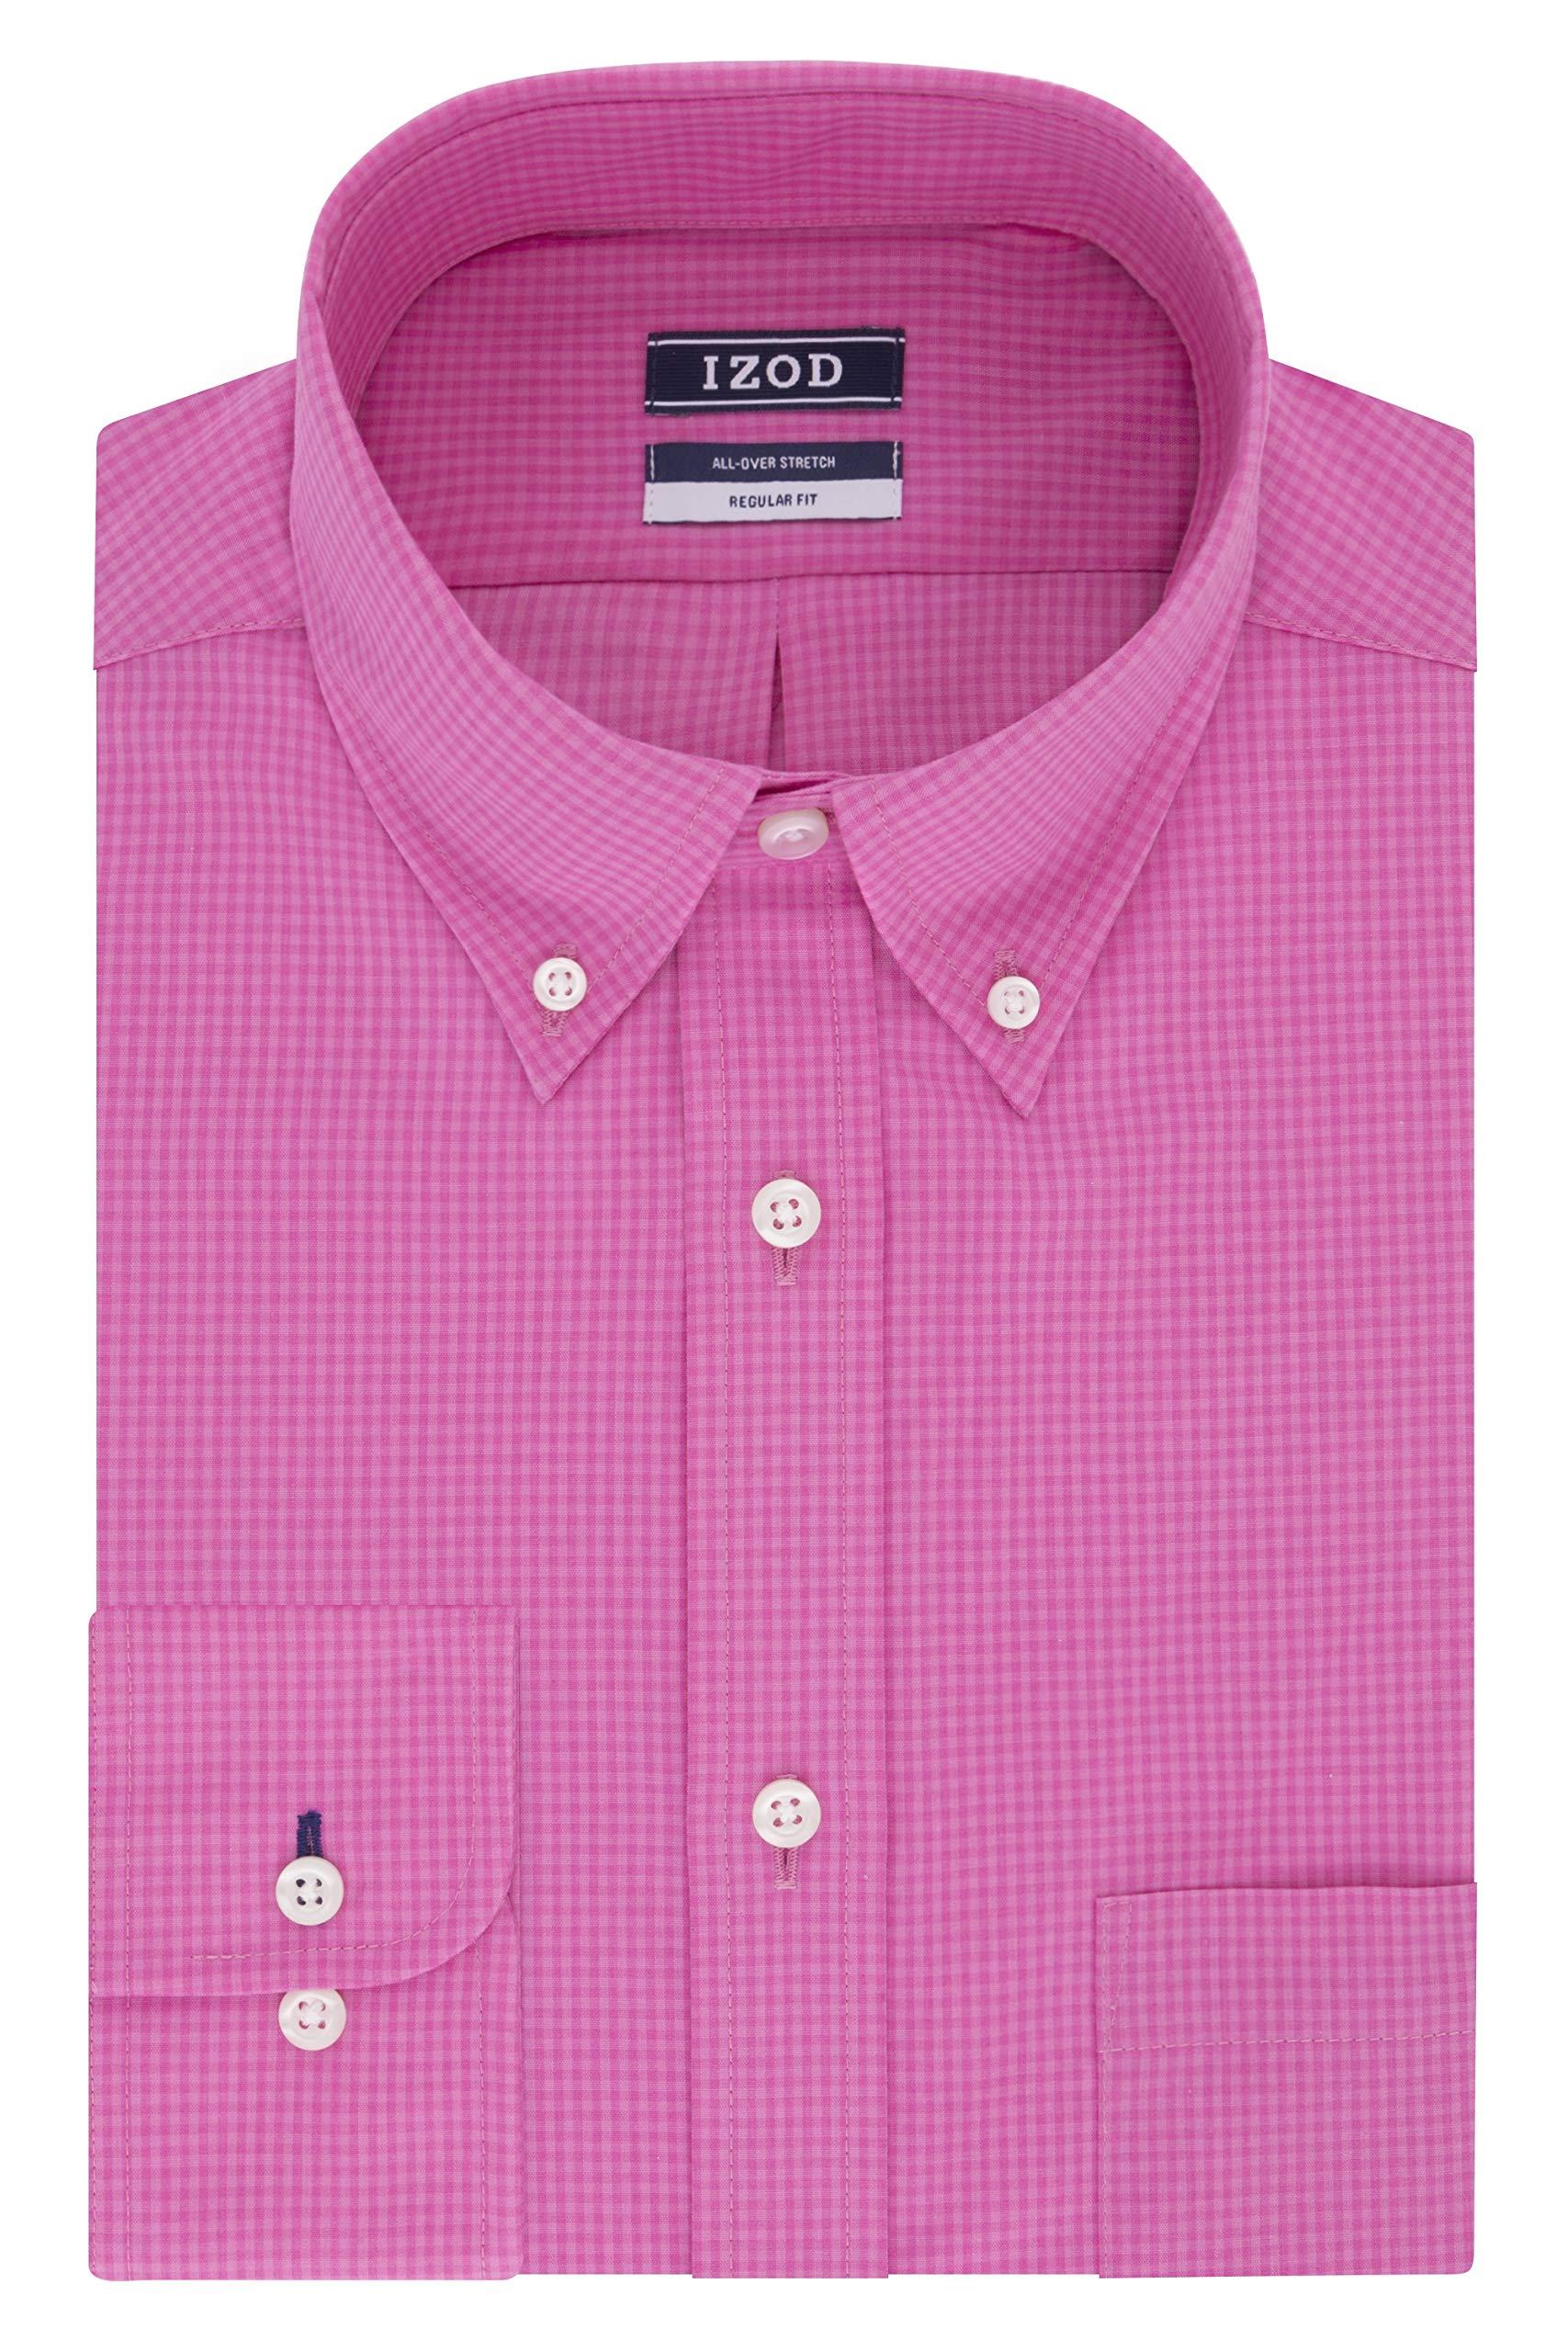 Izod Dress Shirts Regular Fit Stretch Gingham in Bright Pink (Pink) for ...